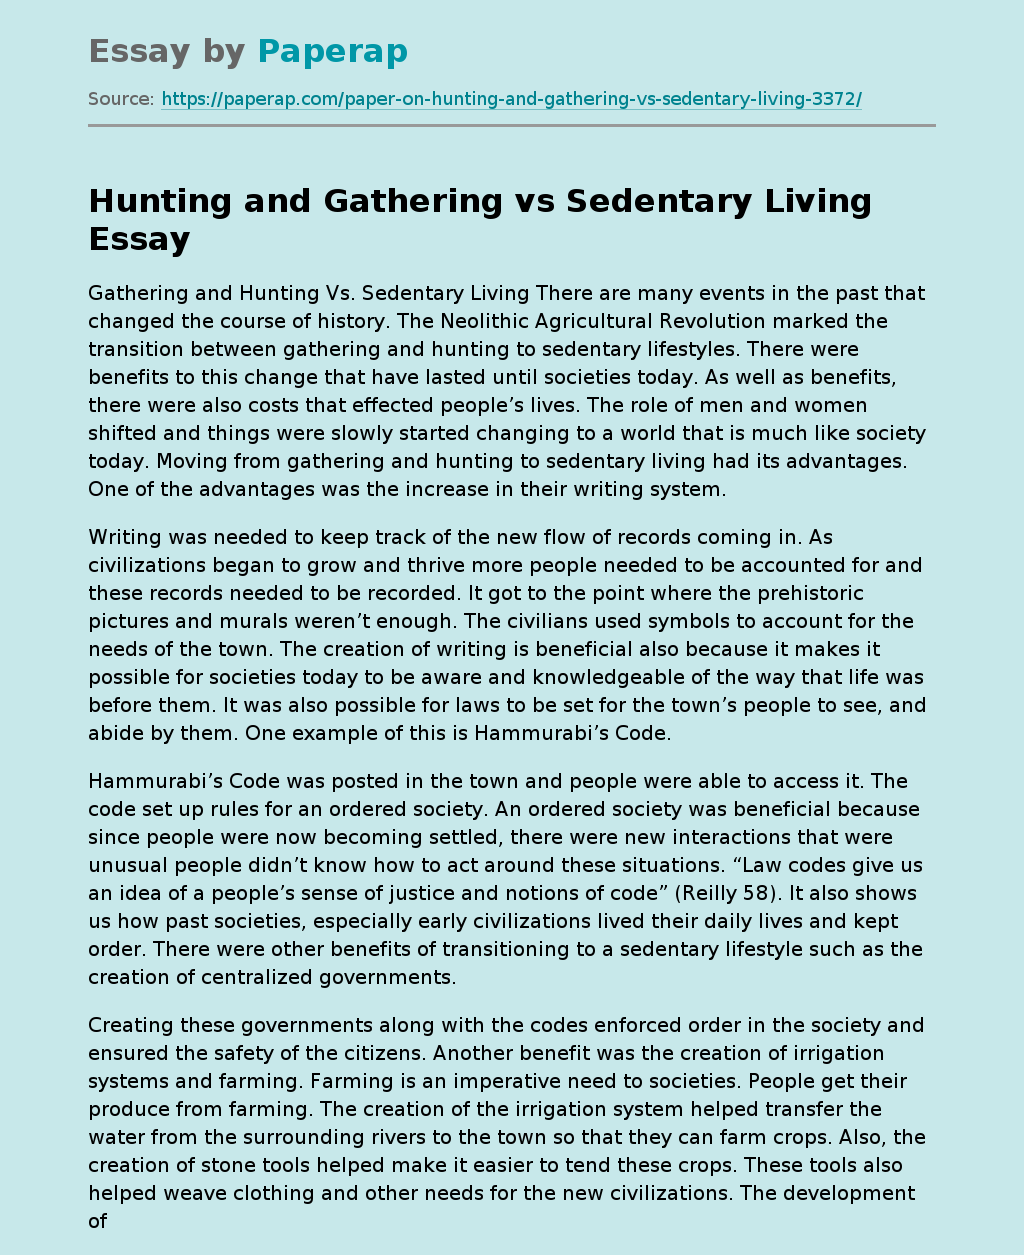 Hunting and Gathering vs Sedentary Living